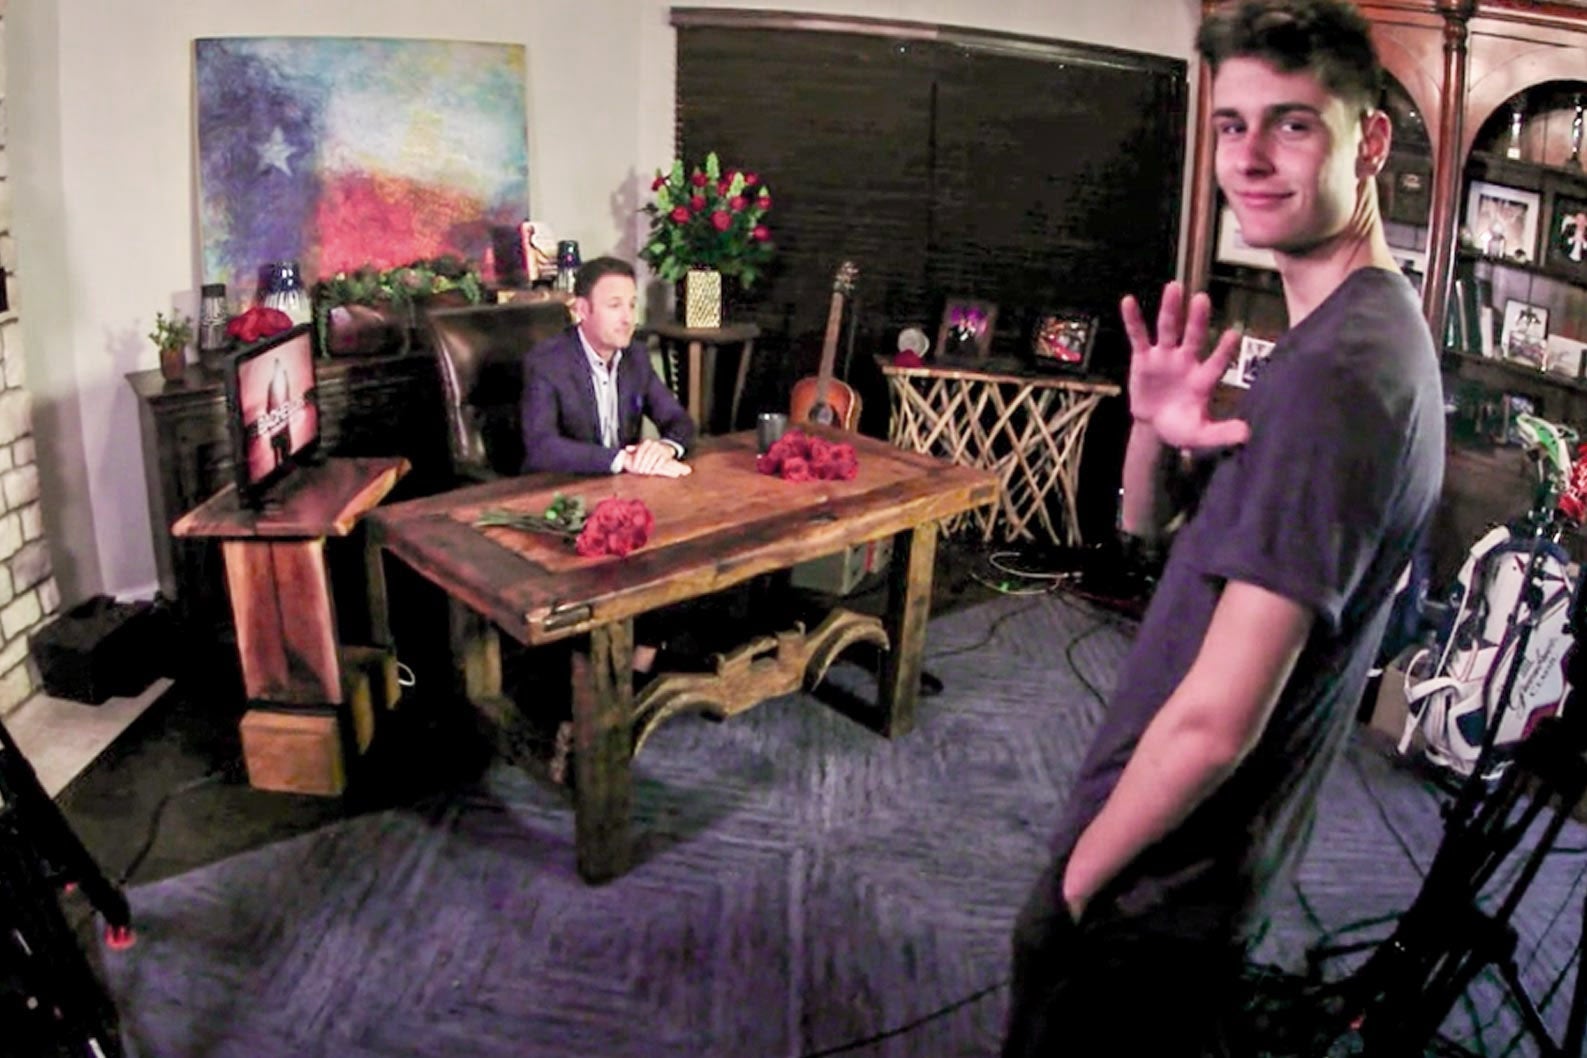 Joshua waving in the foreground as his father sits at a desk in the background in a makeshift set.